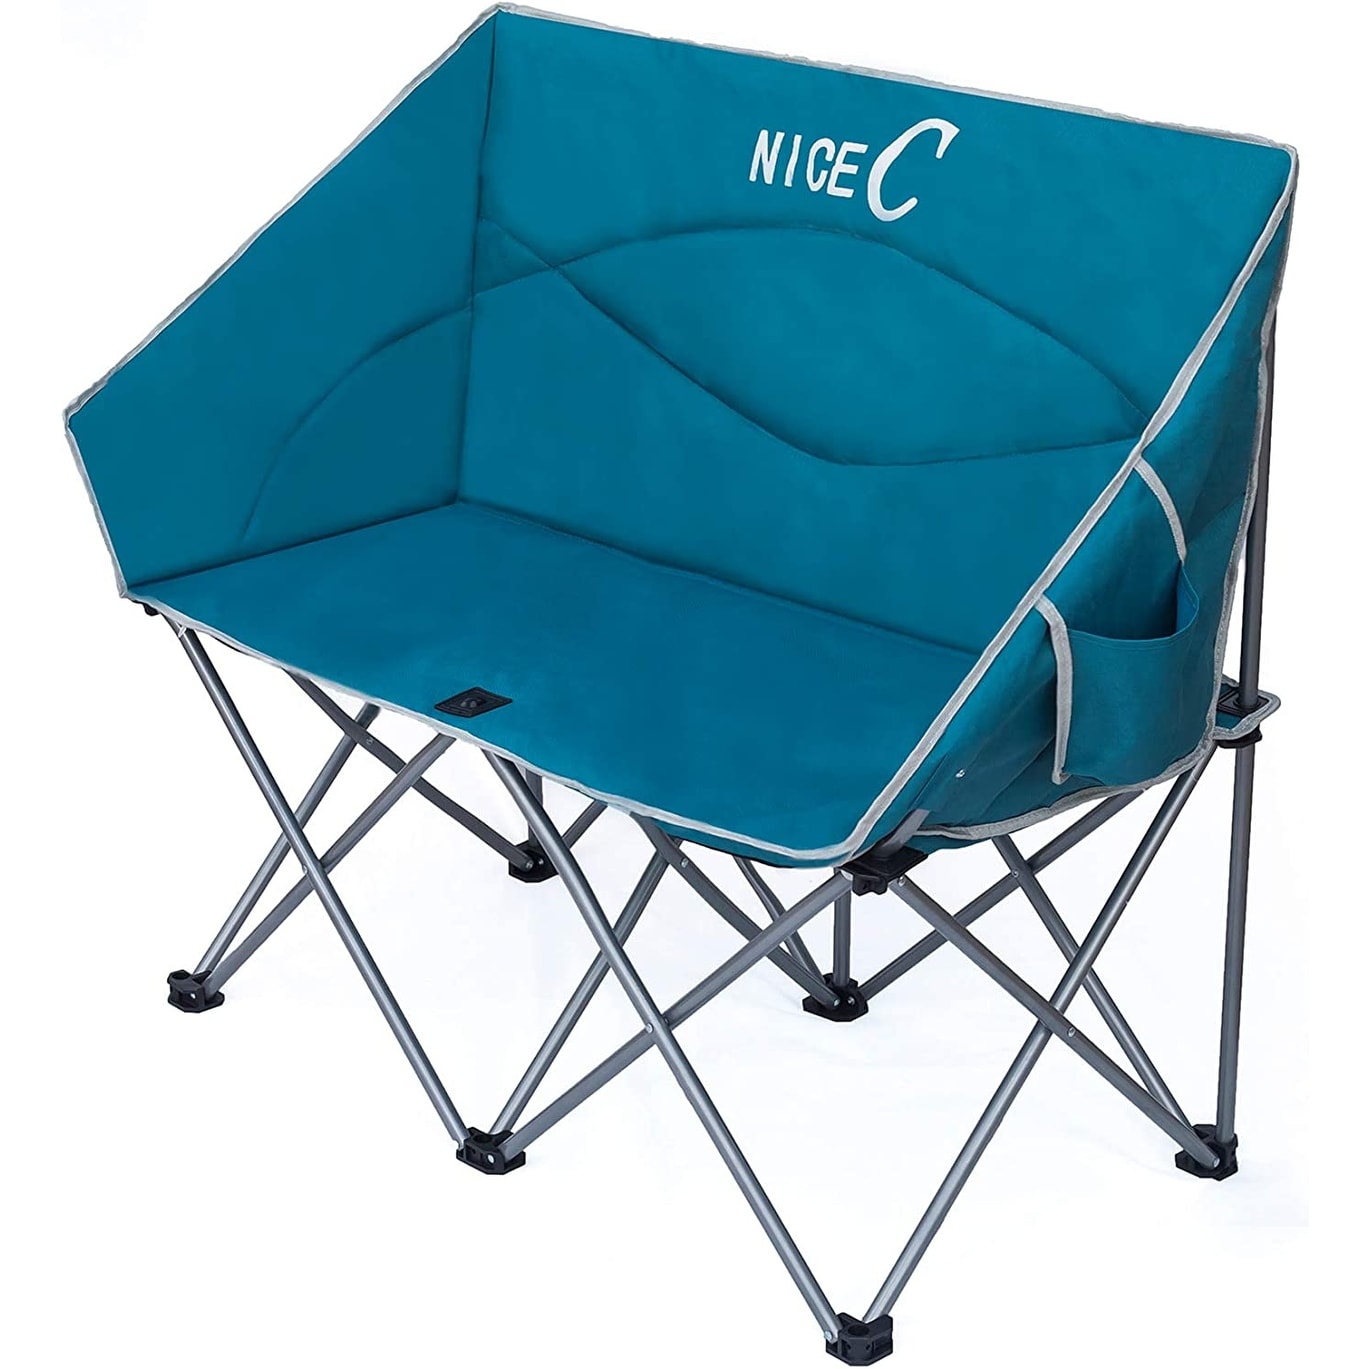 Loveseat  Double Camping Chair  Oversized Folding Camp Seat With Strap Carry Bag